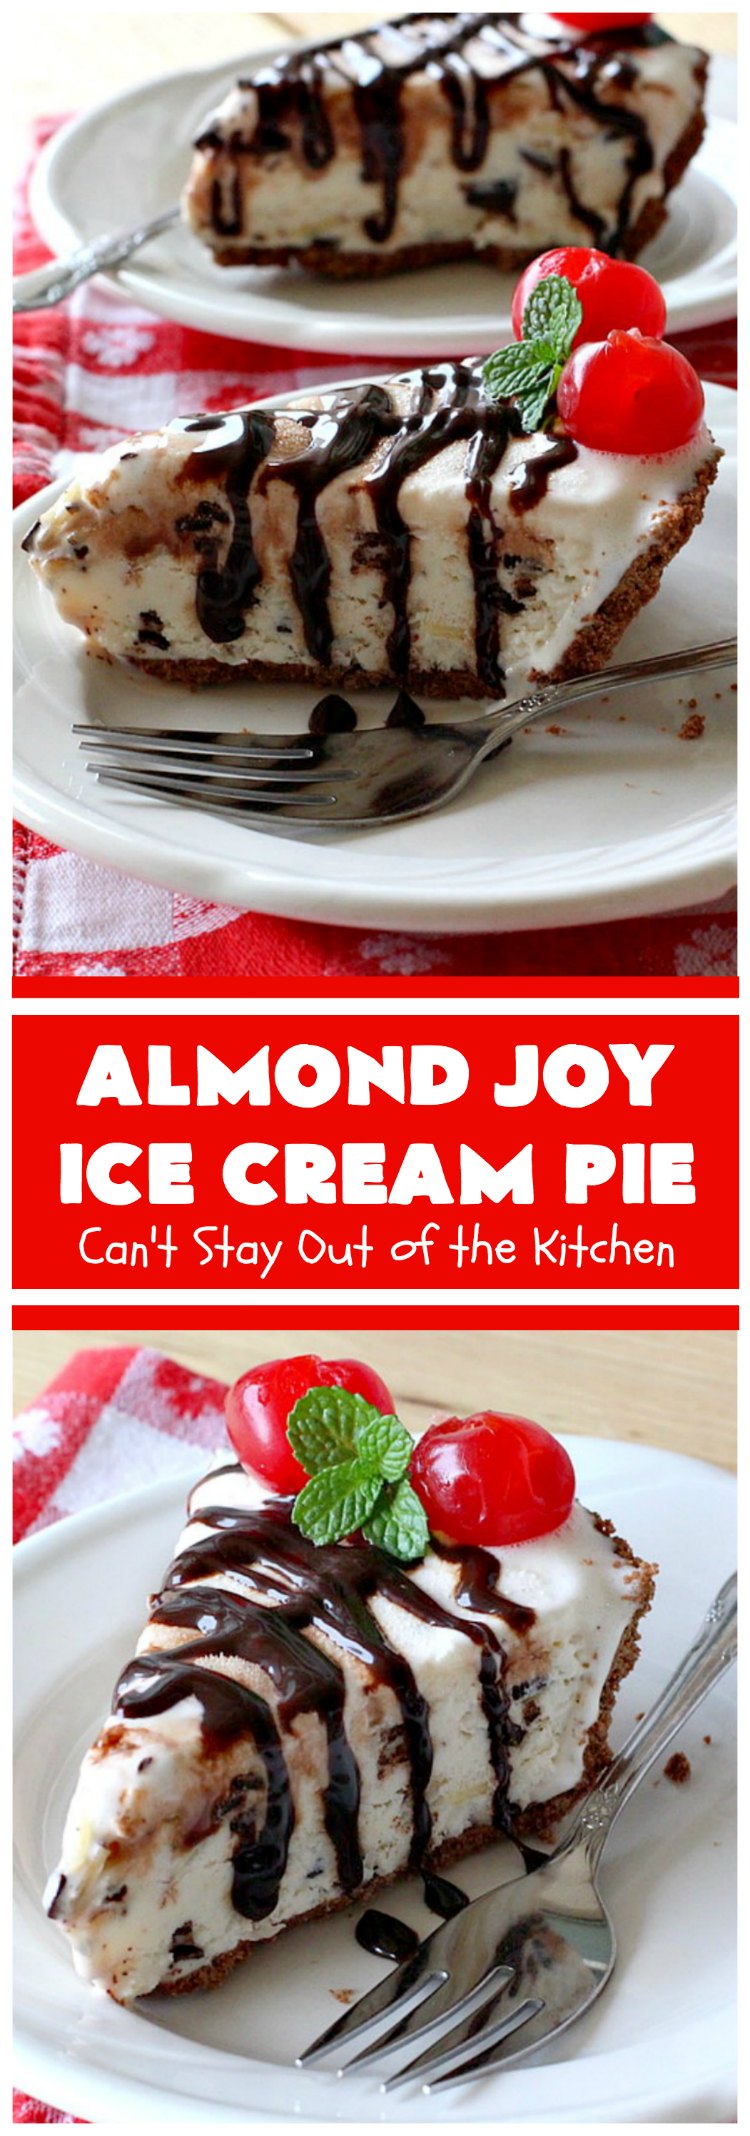 Almond Joy Ice Cream Pie | Can't Stay Out of the Kitchen | this spectacular 4-ingredient #recipe will knock your socks off! It's the ultimate #dessert for #ValentinesDay or other special occasions. It tastes like eating #AlmondJoyBars but in #IceCream form! #AlmondJoyDessert #ChocolateDessert #IceCreamDessert #HolidayDessert #EasterDessert #ValentinesDayDessert #coconut #almonds #chocolate #AlmondJoyIceCreamPie